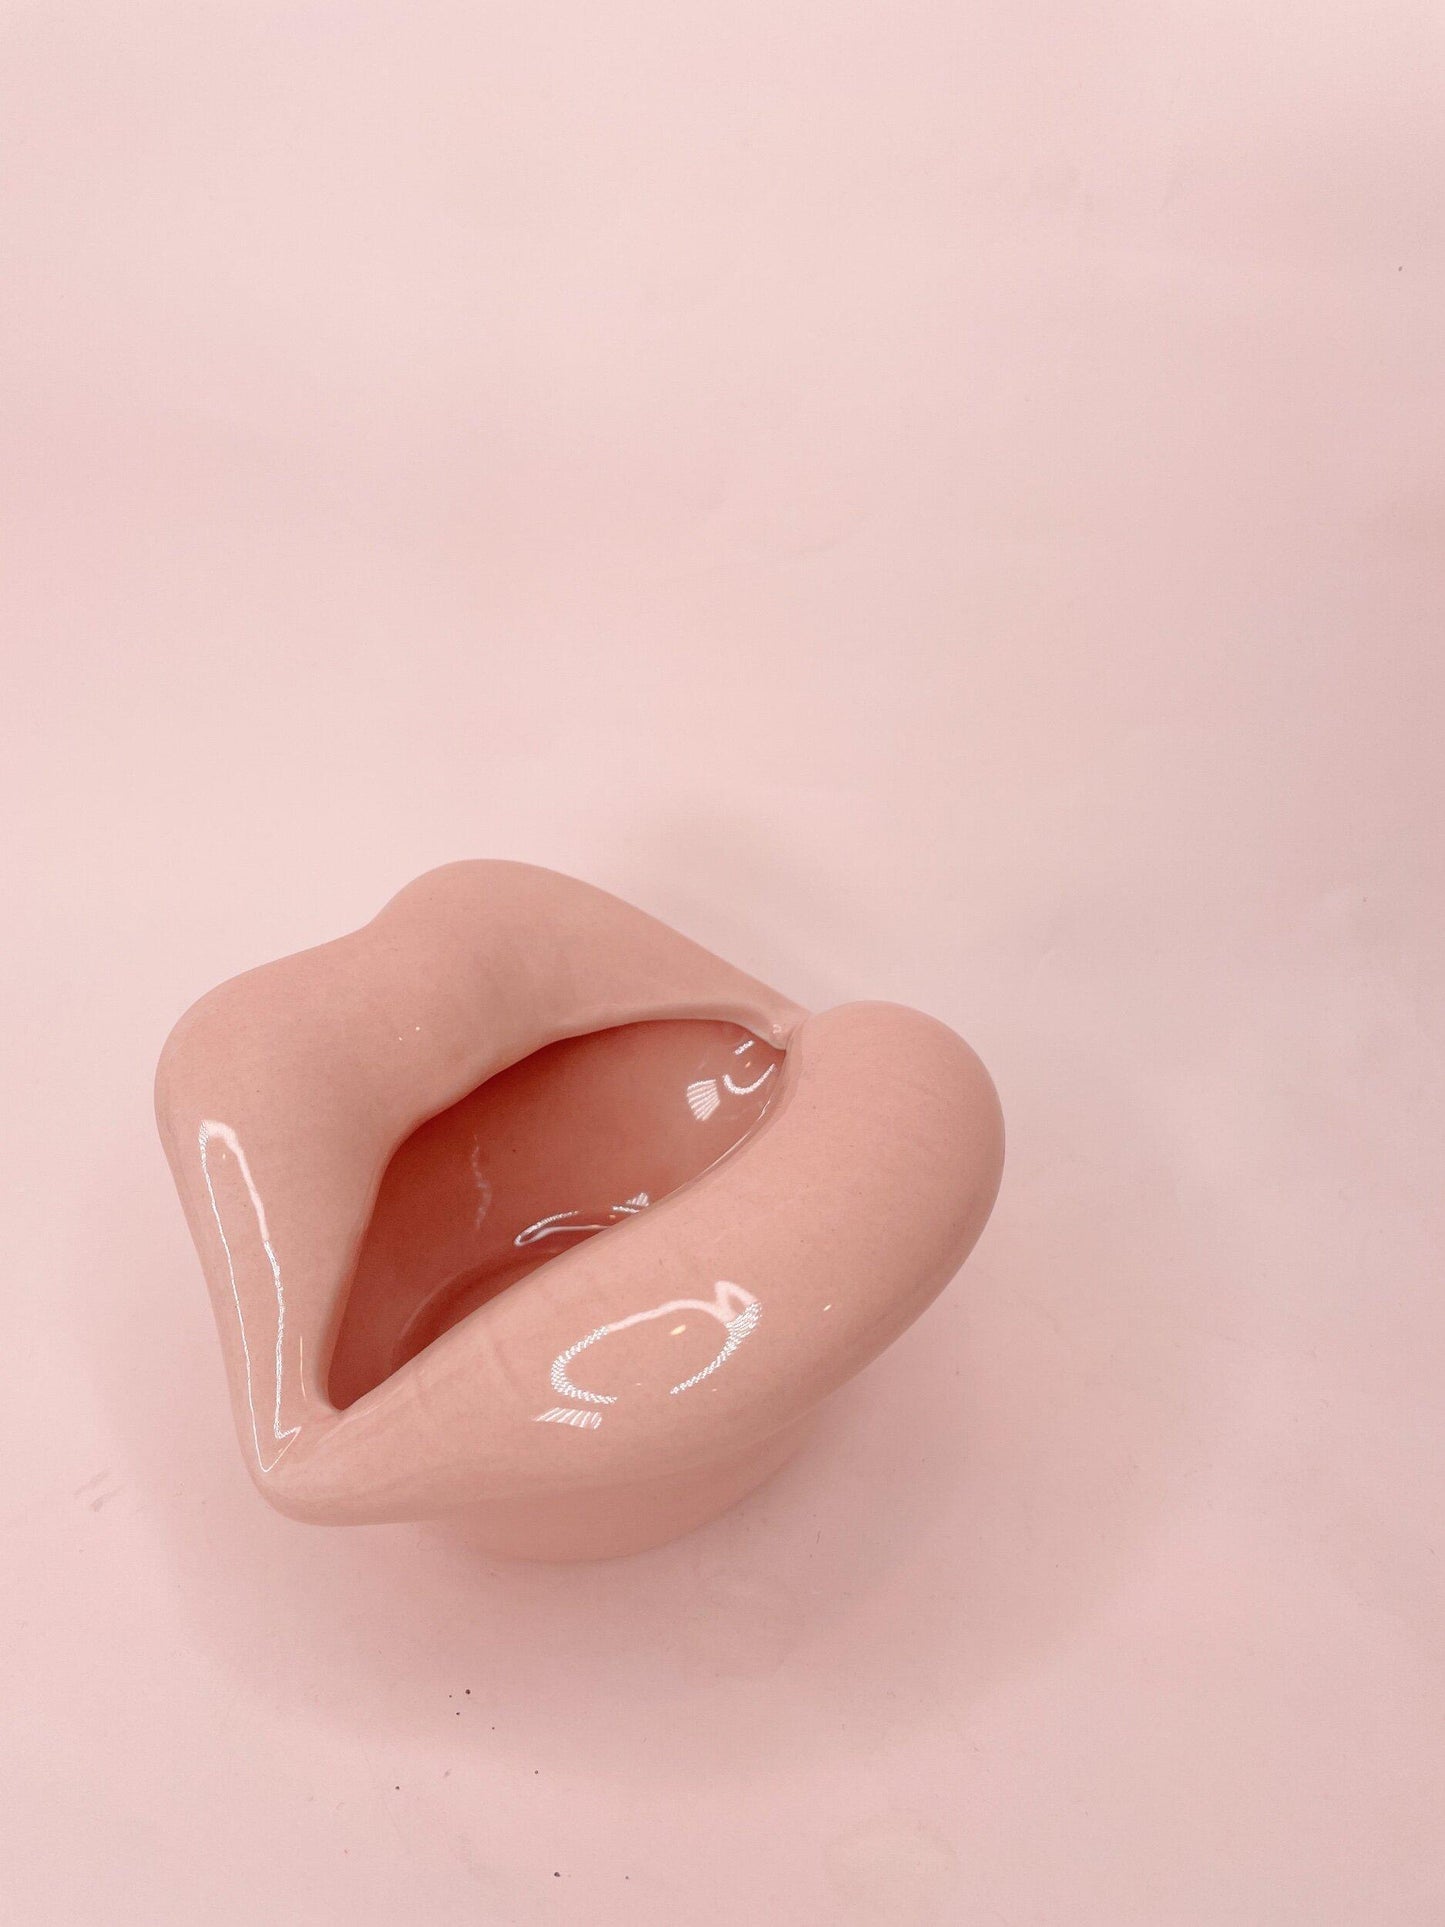 juicy lips container